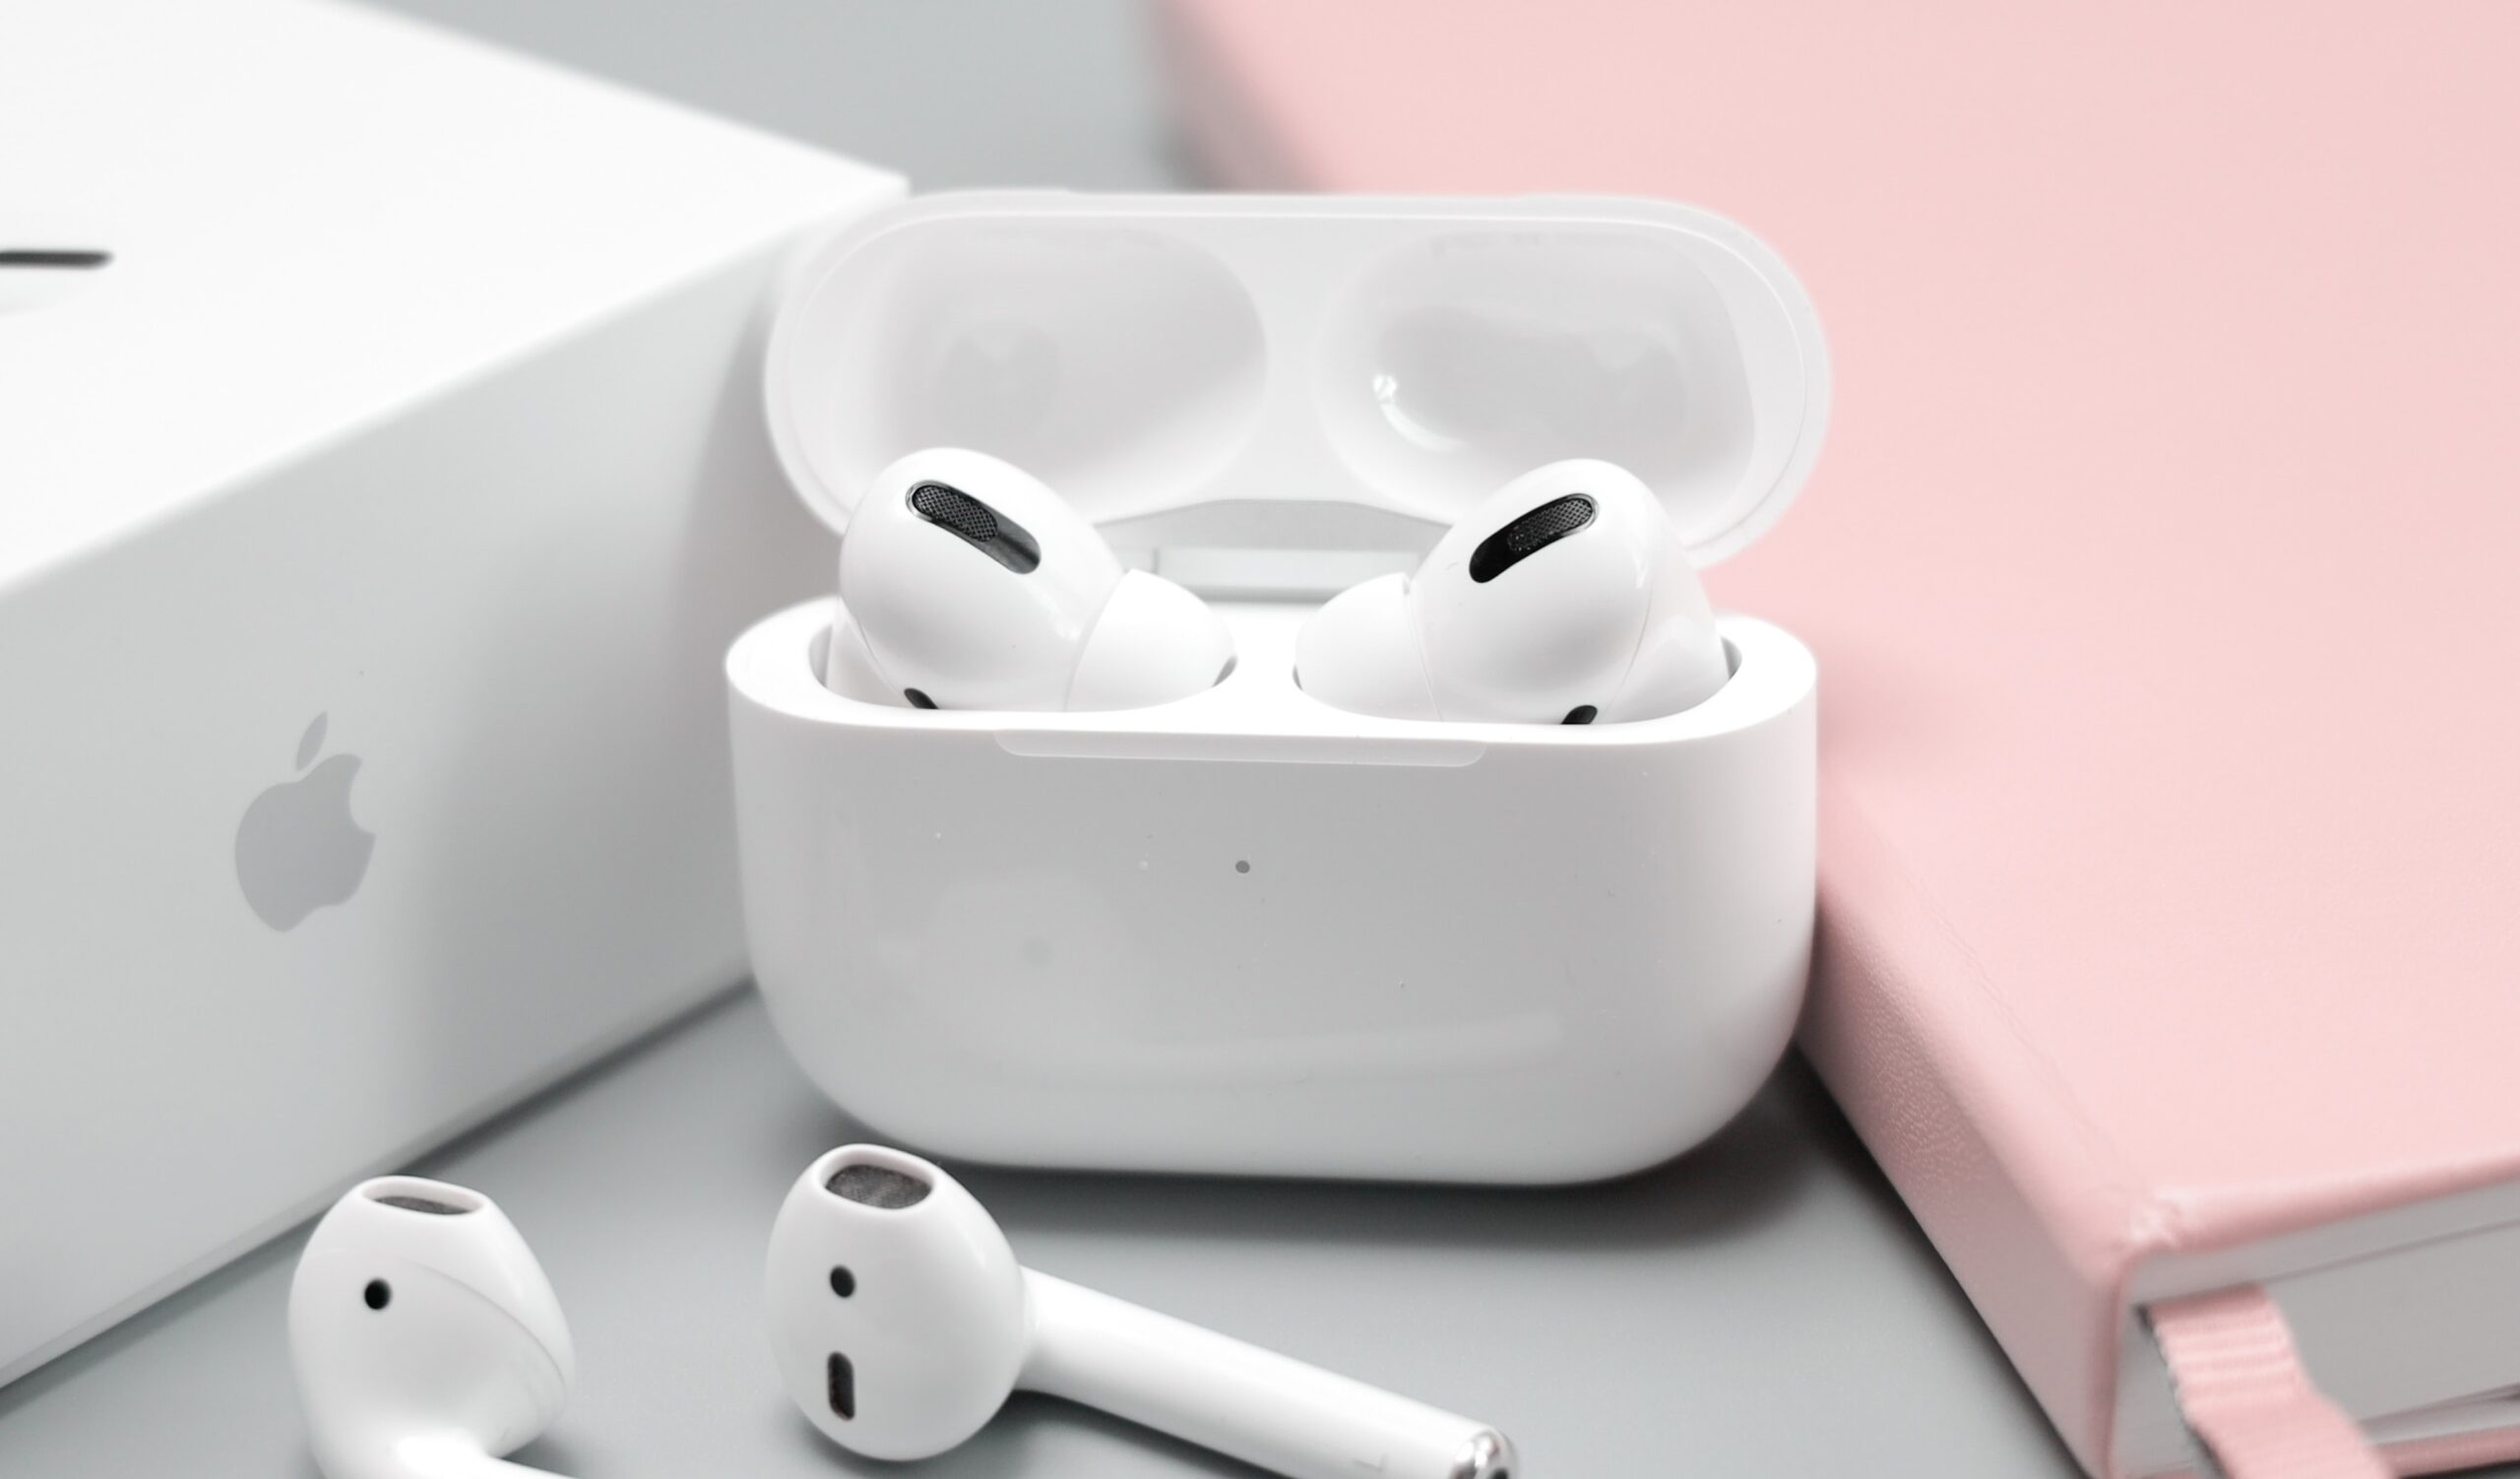 Apple might be working on AirPods Lite for $99